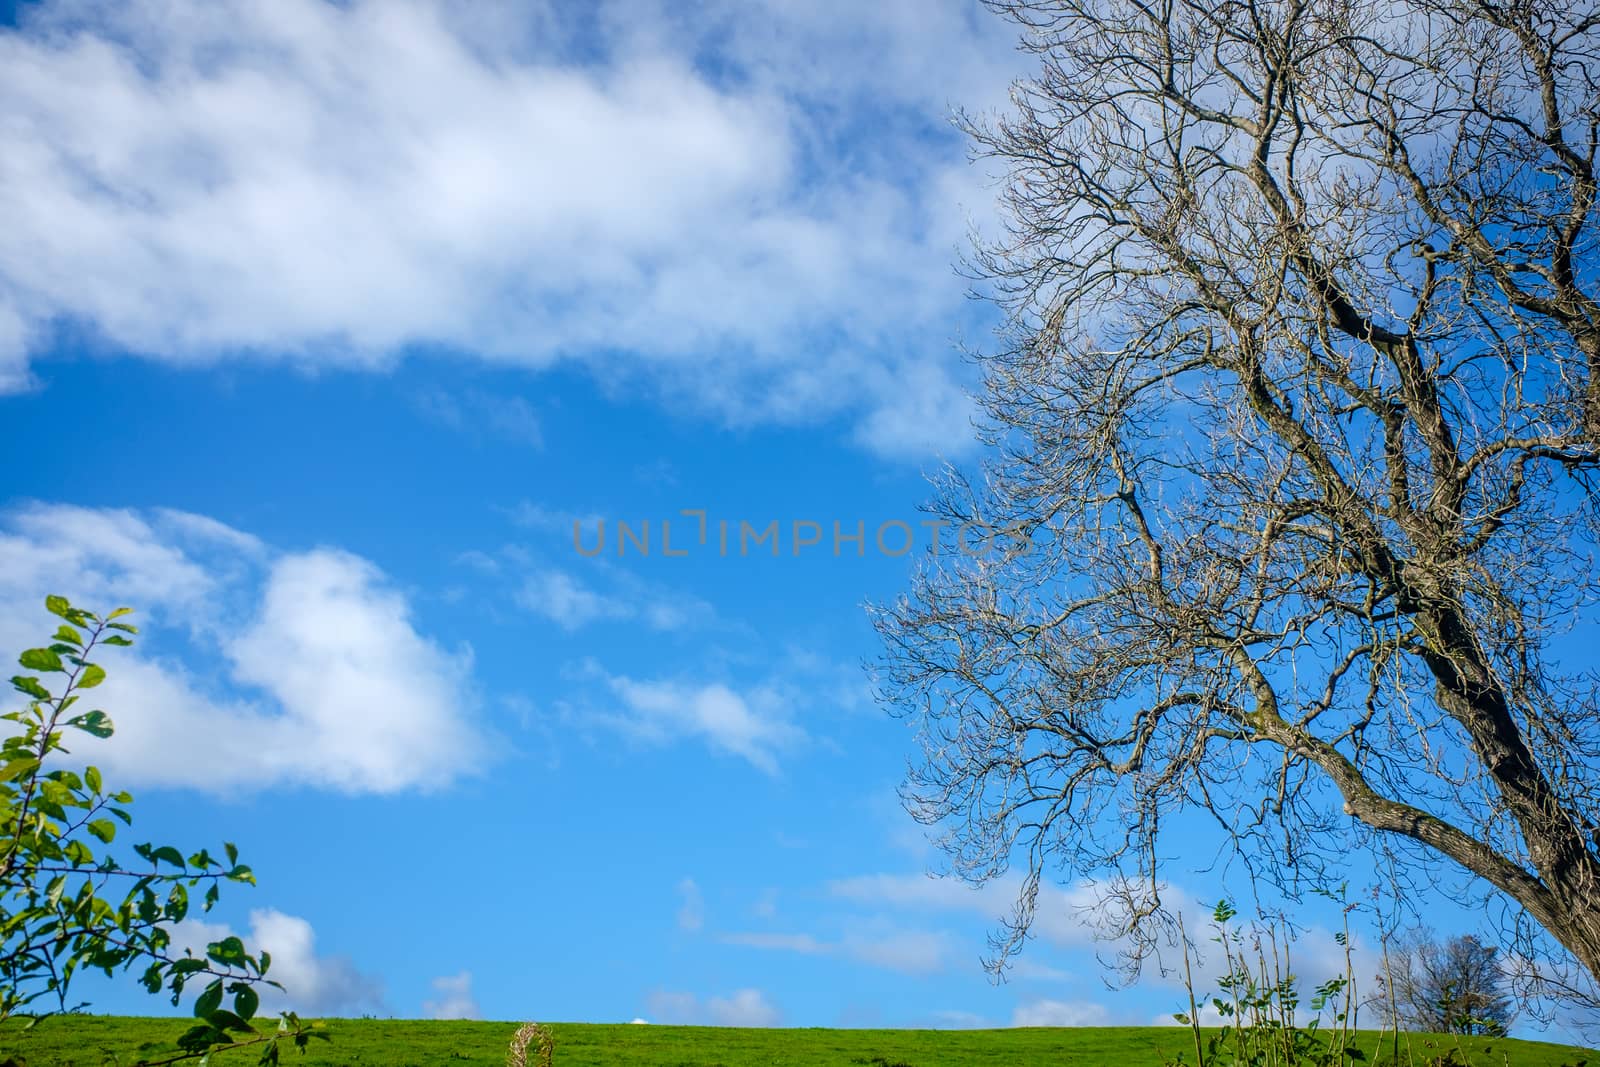 green leaves from the trees under a bright blue sky by paddythegolfer